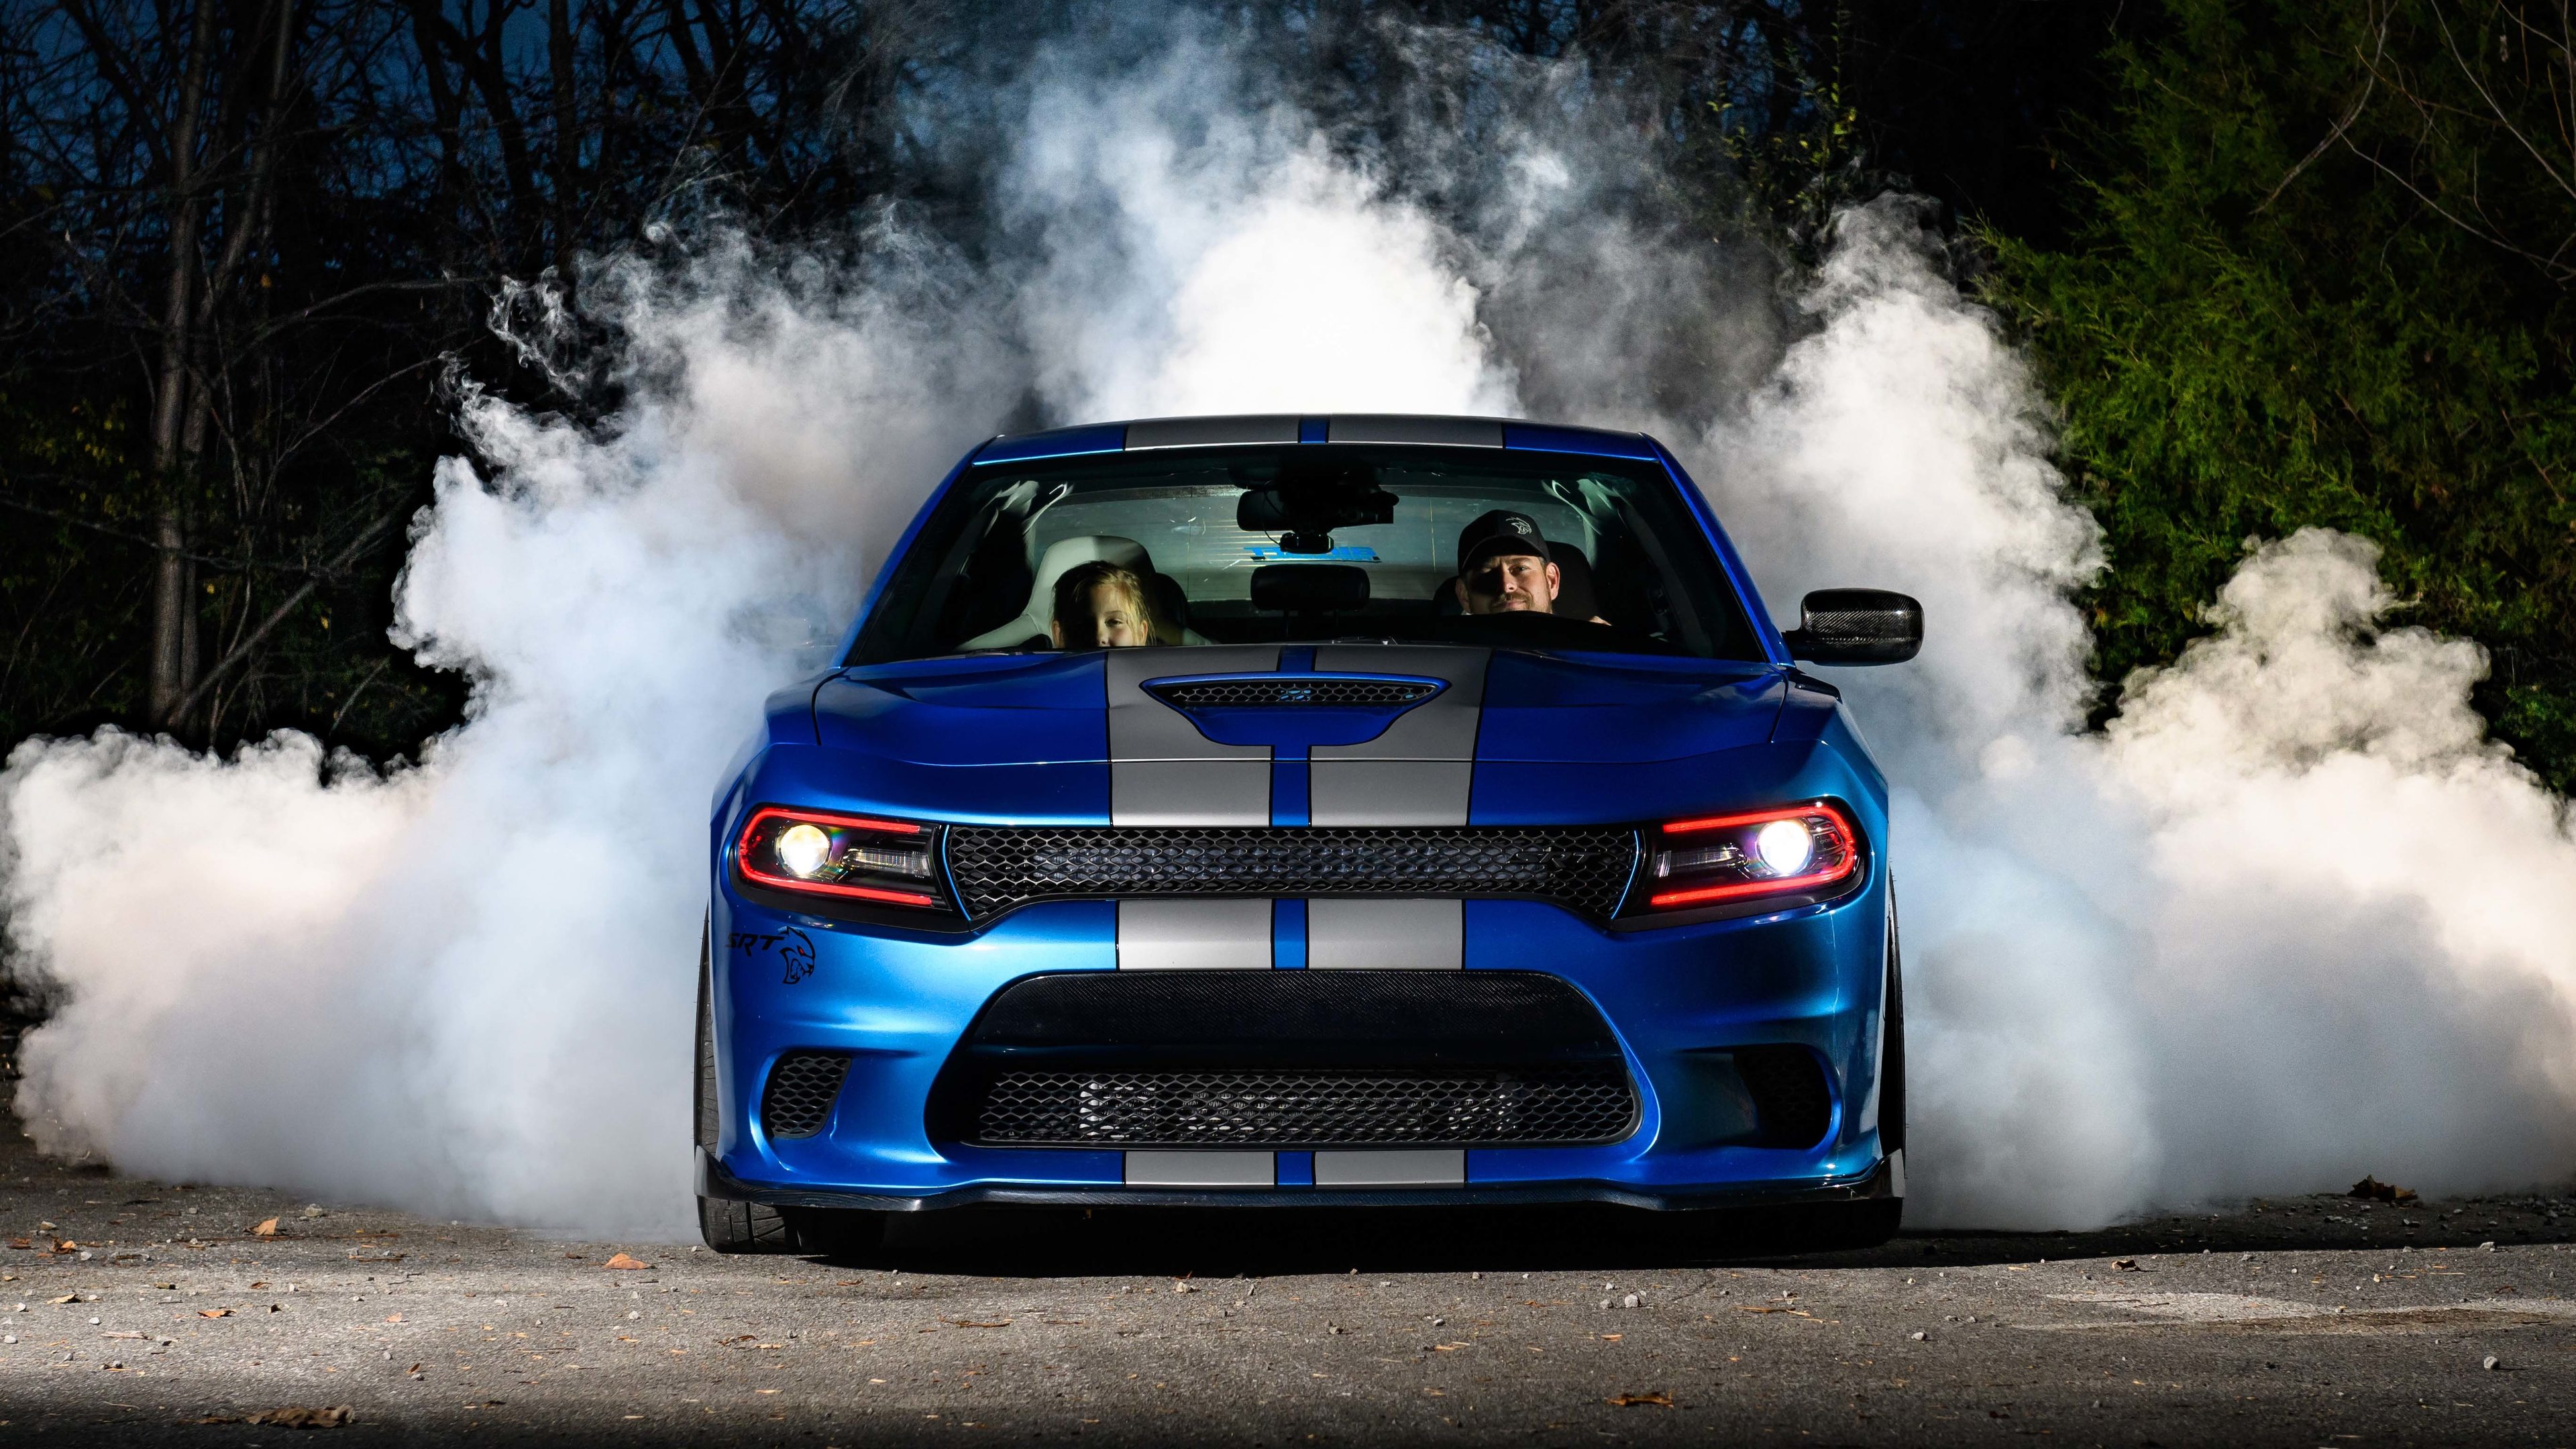 Charger Burnout hd-wallpapers, dodge wallpapers, dodge charger